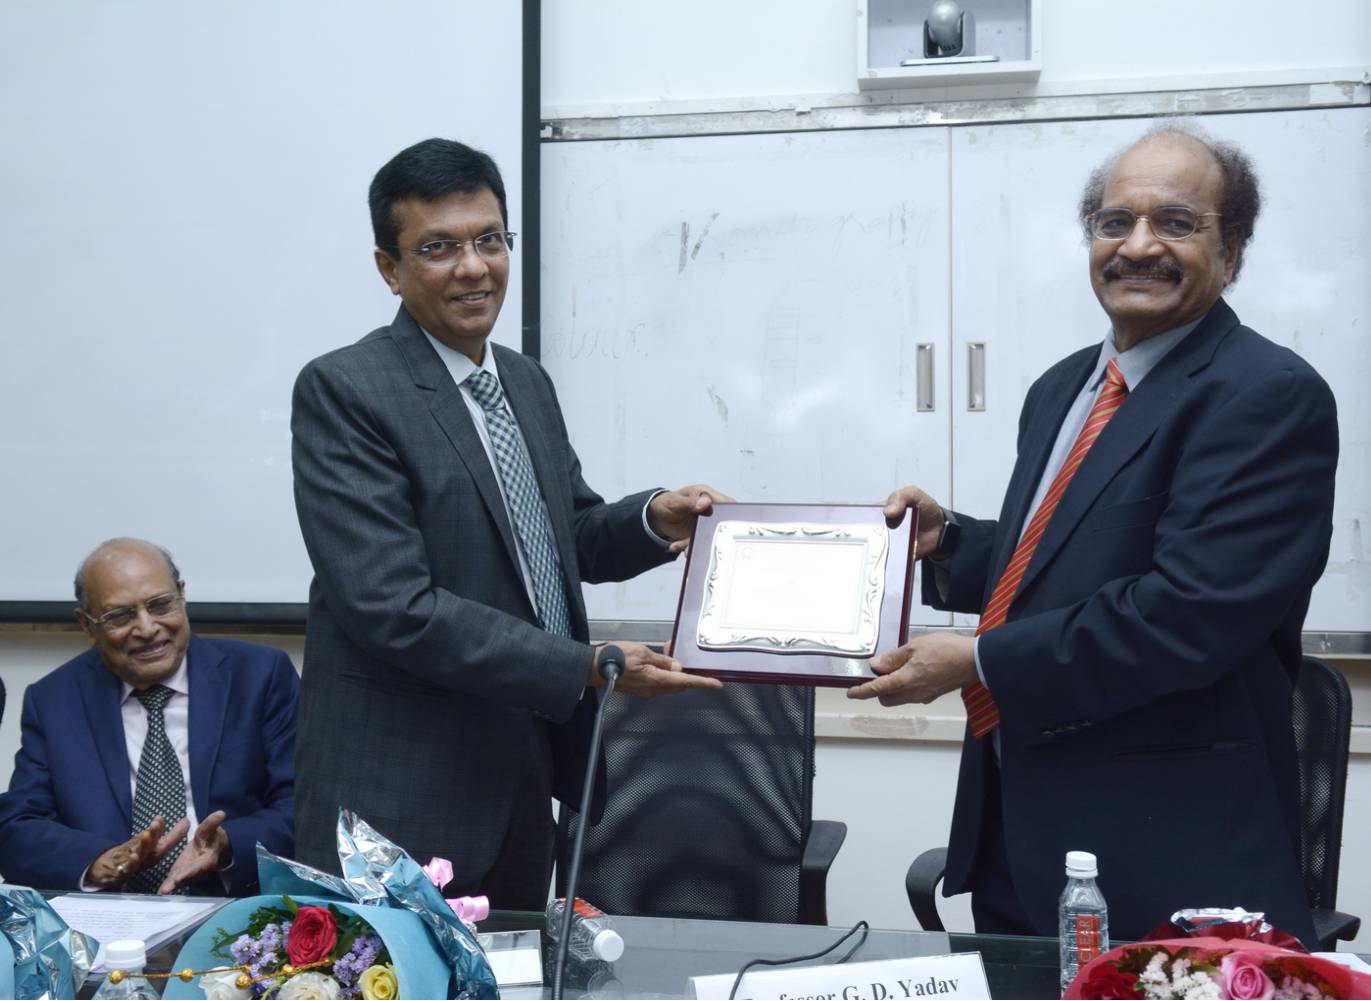 Sauradip-chemical-industries-pvt-ltd-visiting-fellowship-lecture-in-the-areas-of-dyestuff-technology